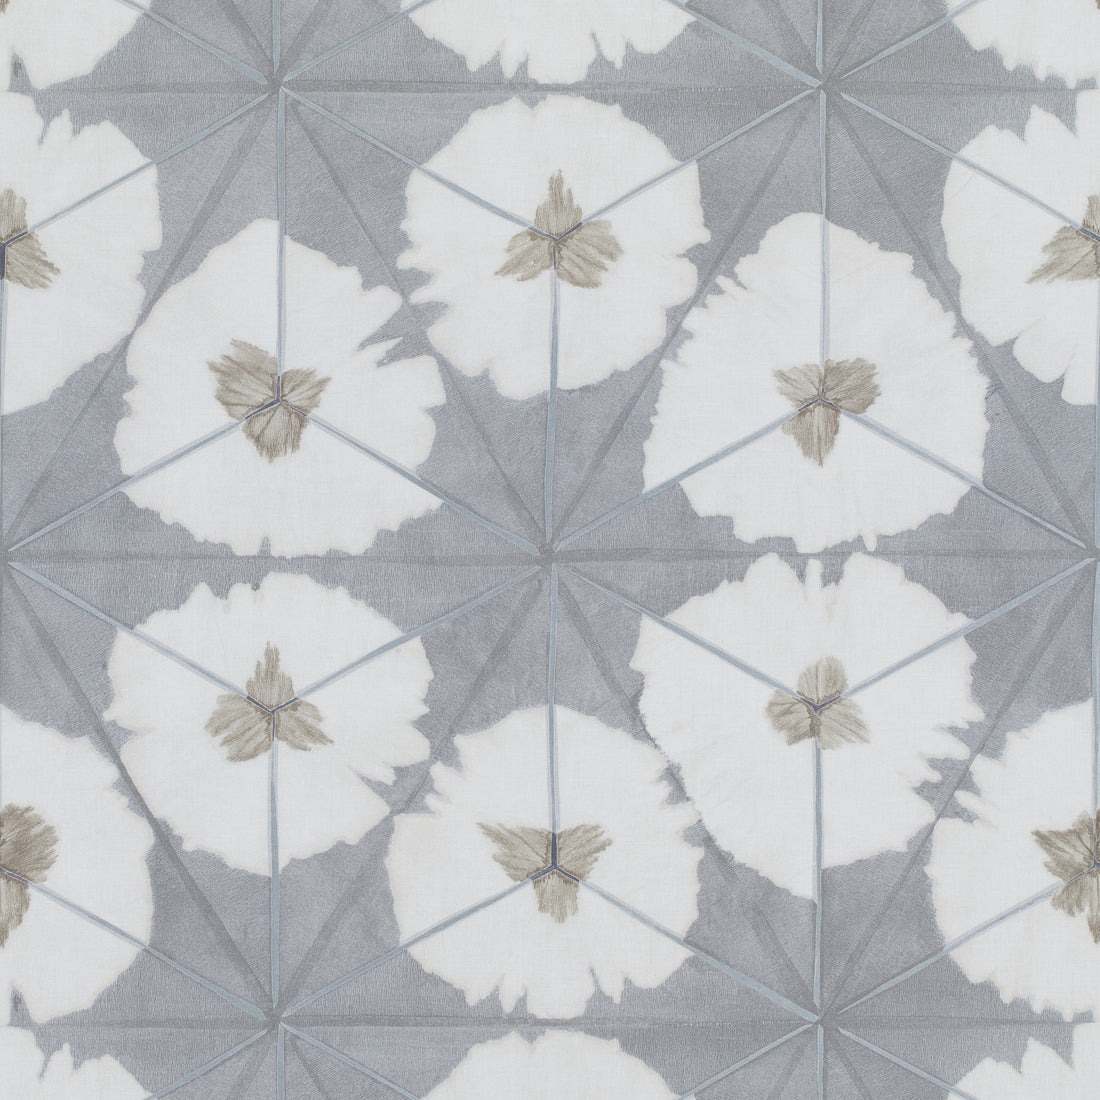 Sunburst fabric in grey color - pattern number F913092 - by Thibaut in the Summer House collection